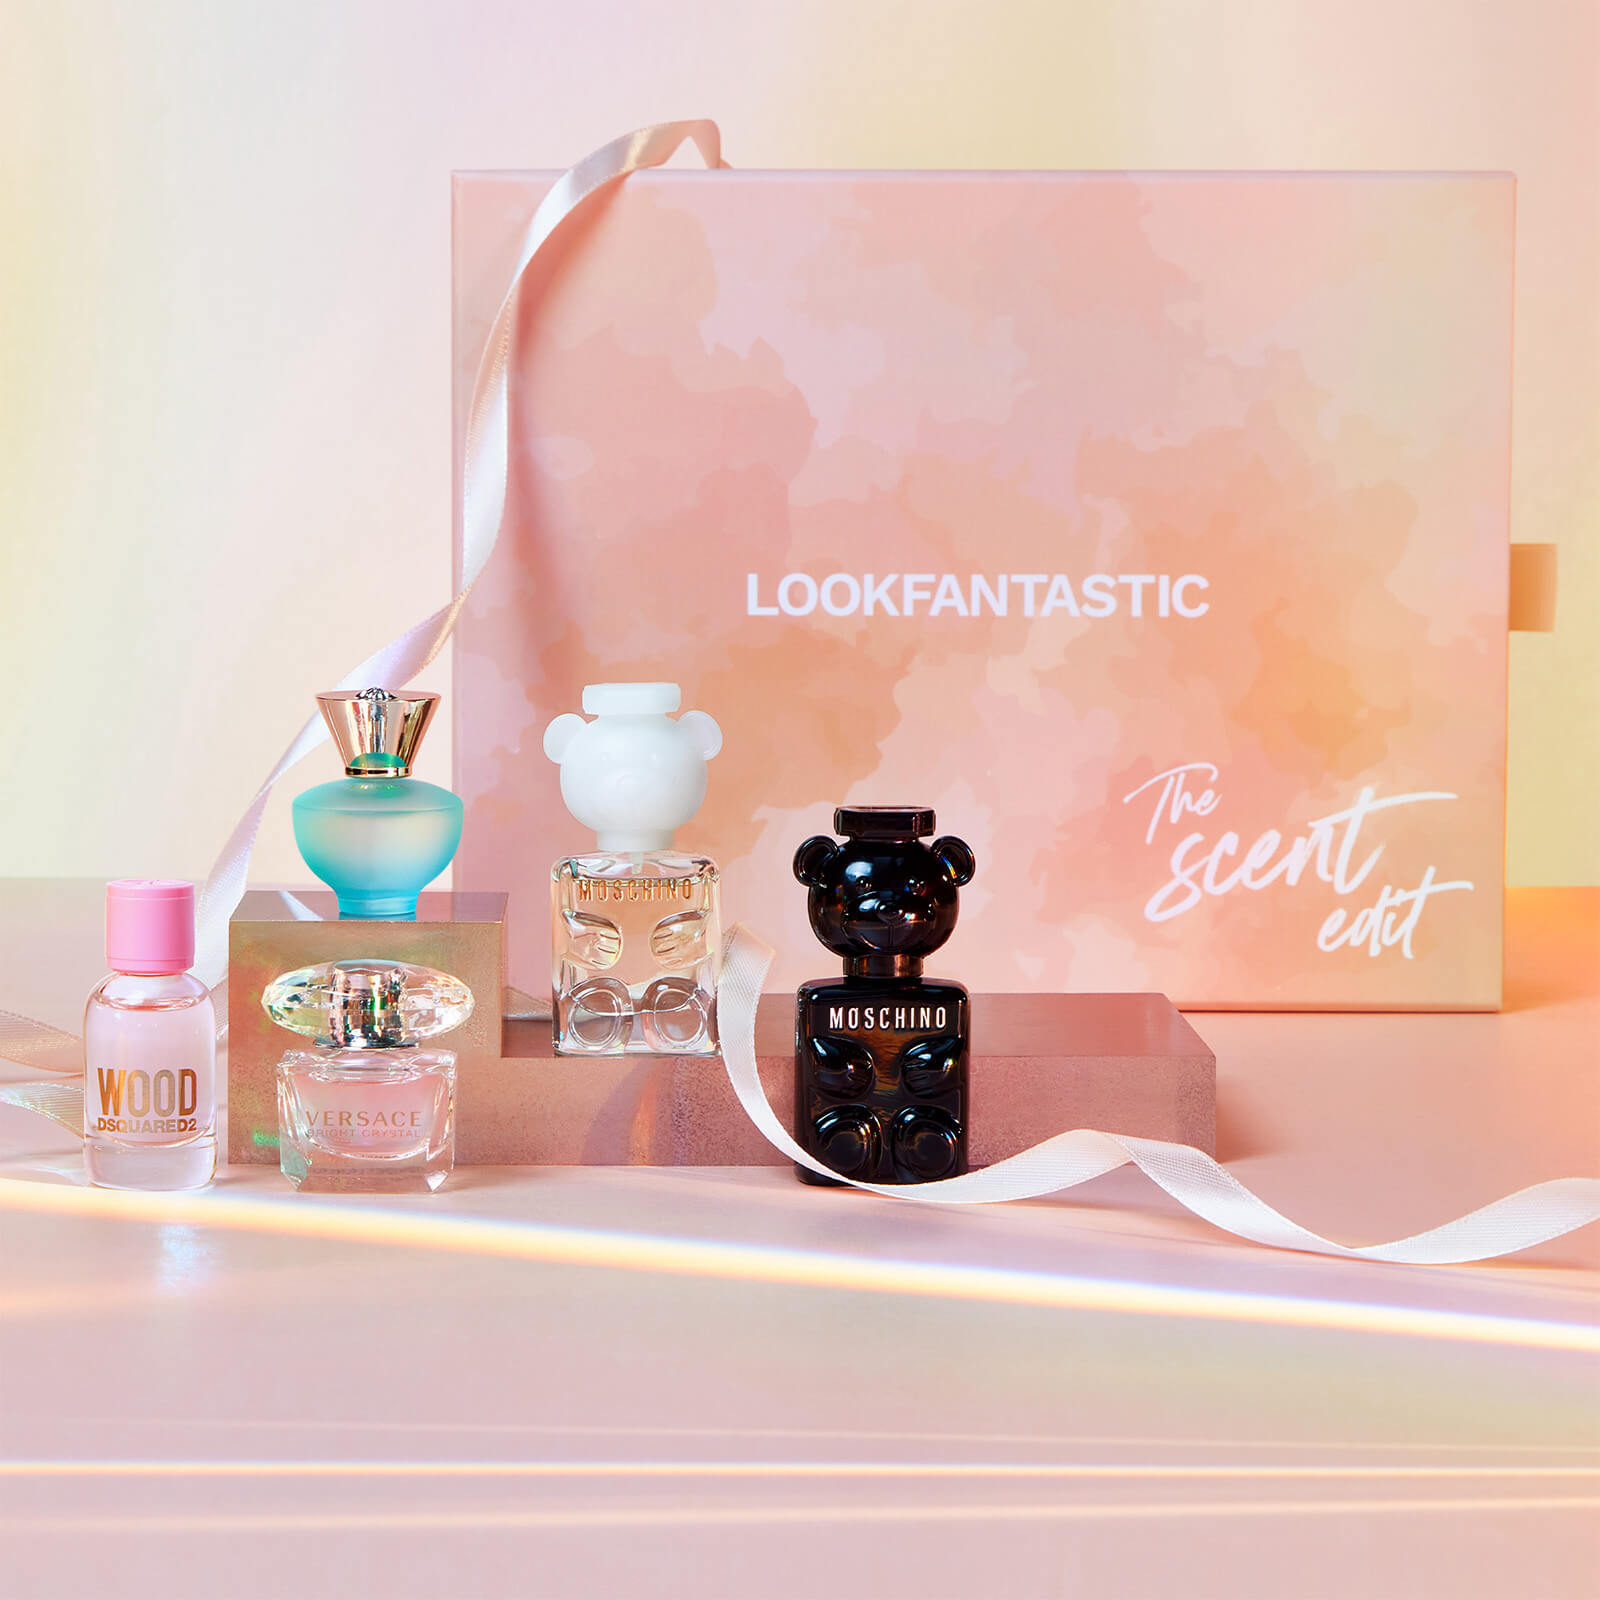 LOOKFANTASTIC Mother's Day Scent Edit Two